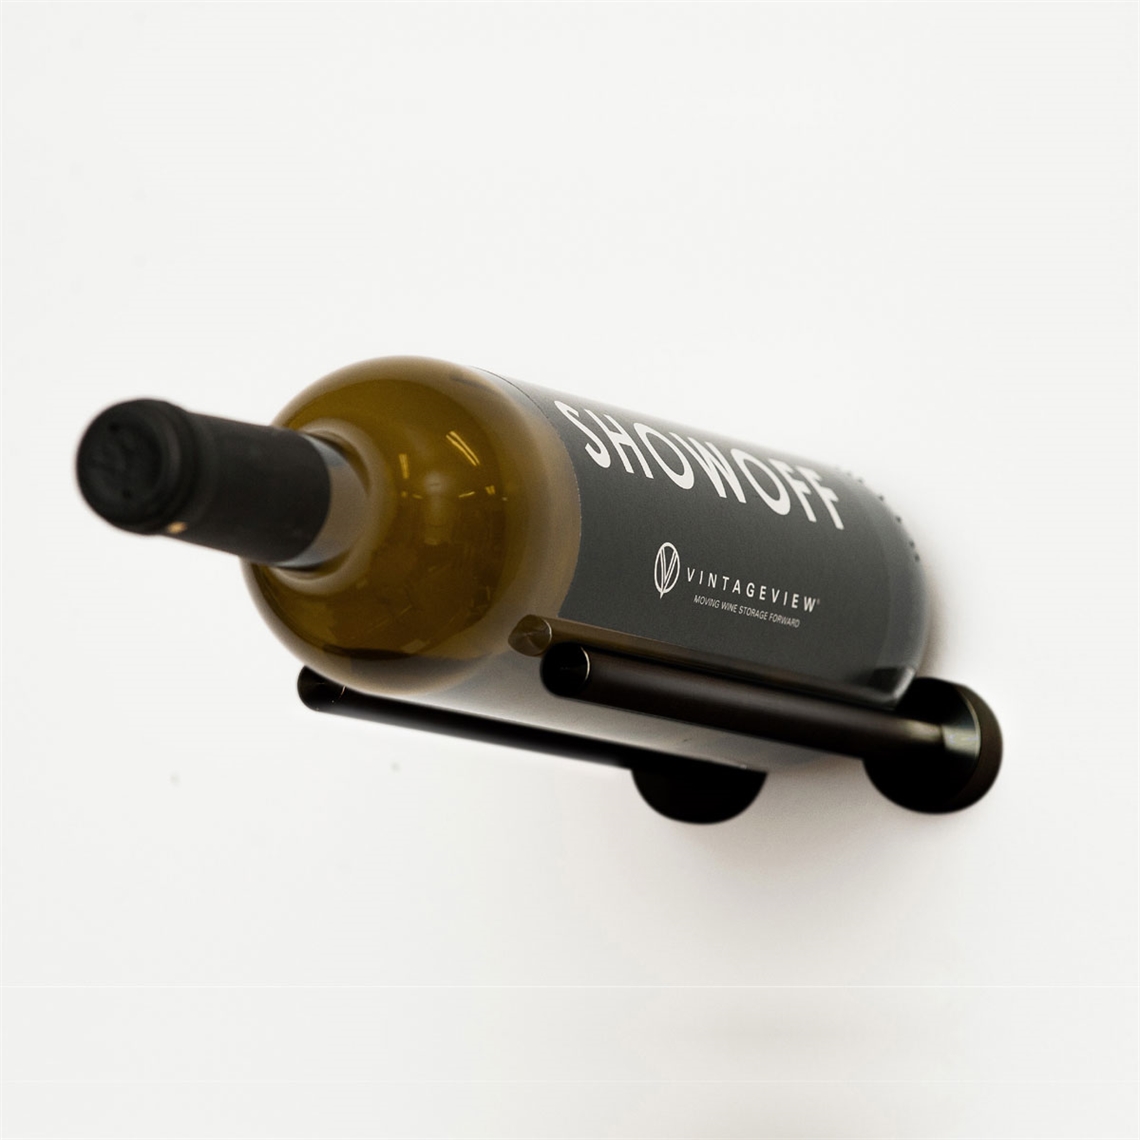 View more self-assembly wine rack buying guide from our Wall Mounted Wine Racks range